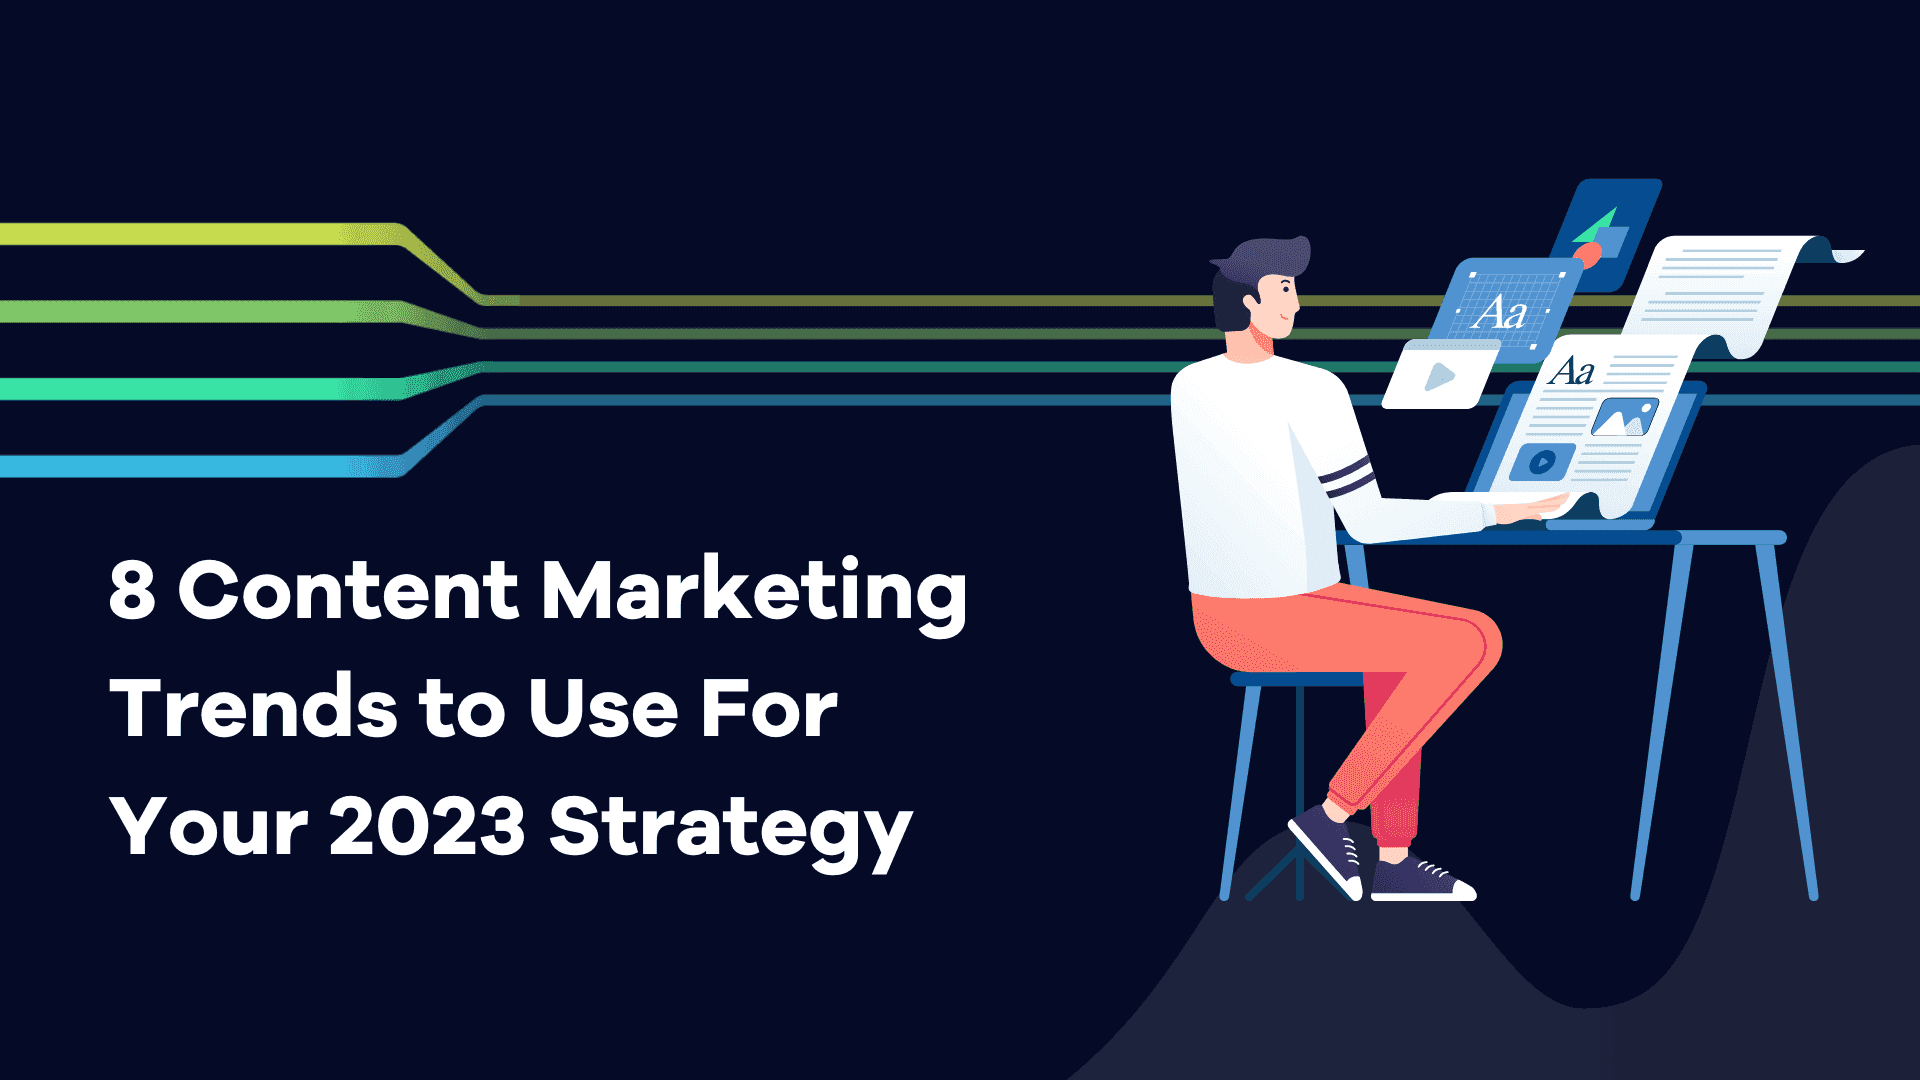 Content Marketing Trends to Use For Your 2023 Strategy